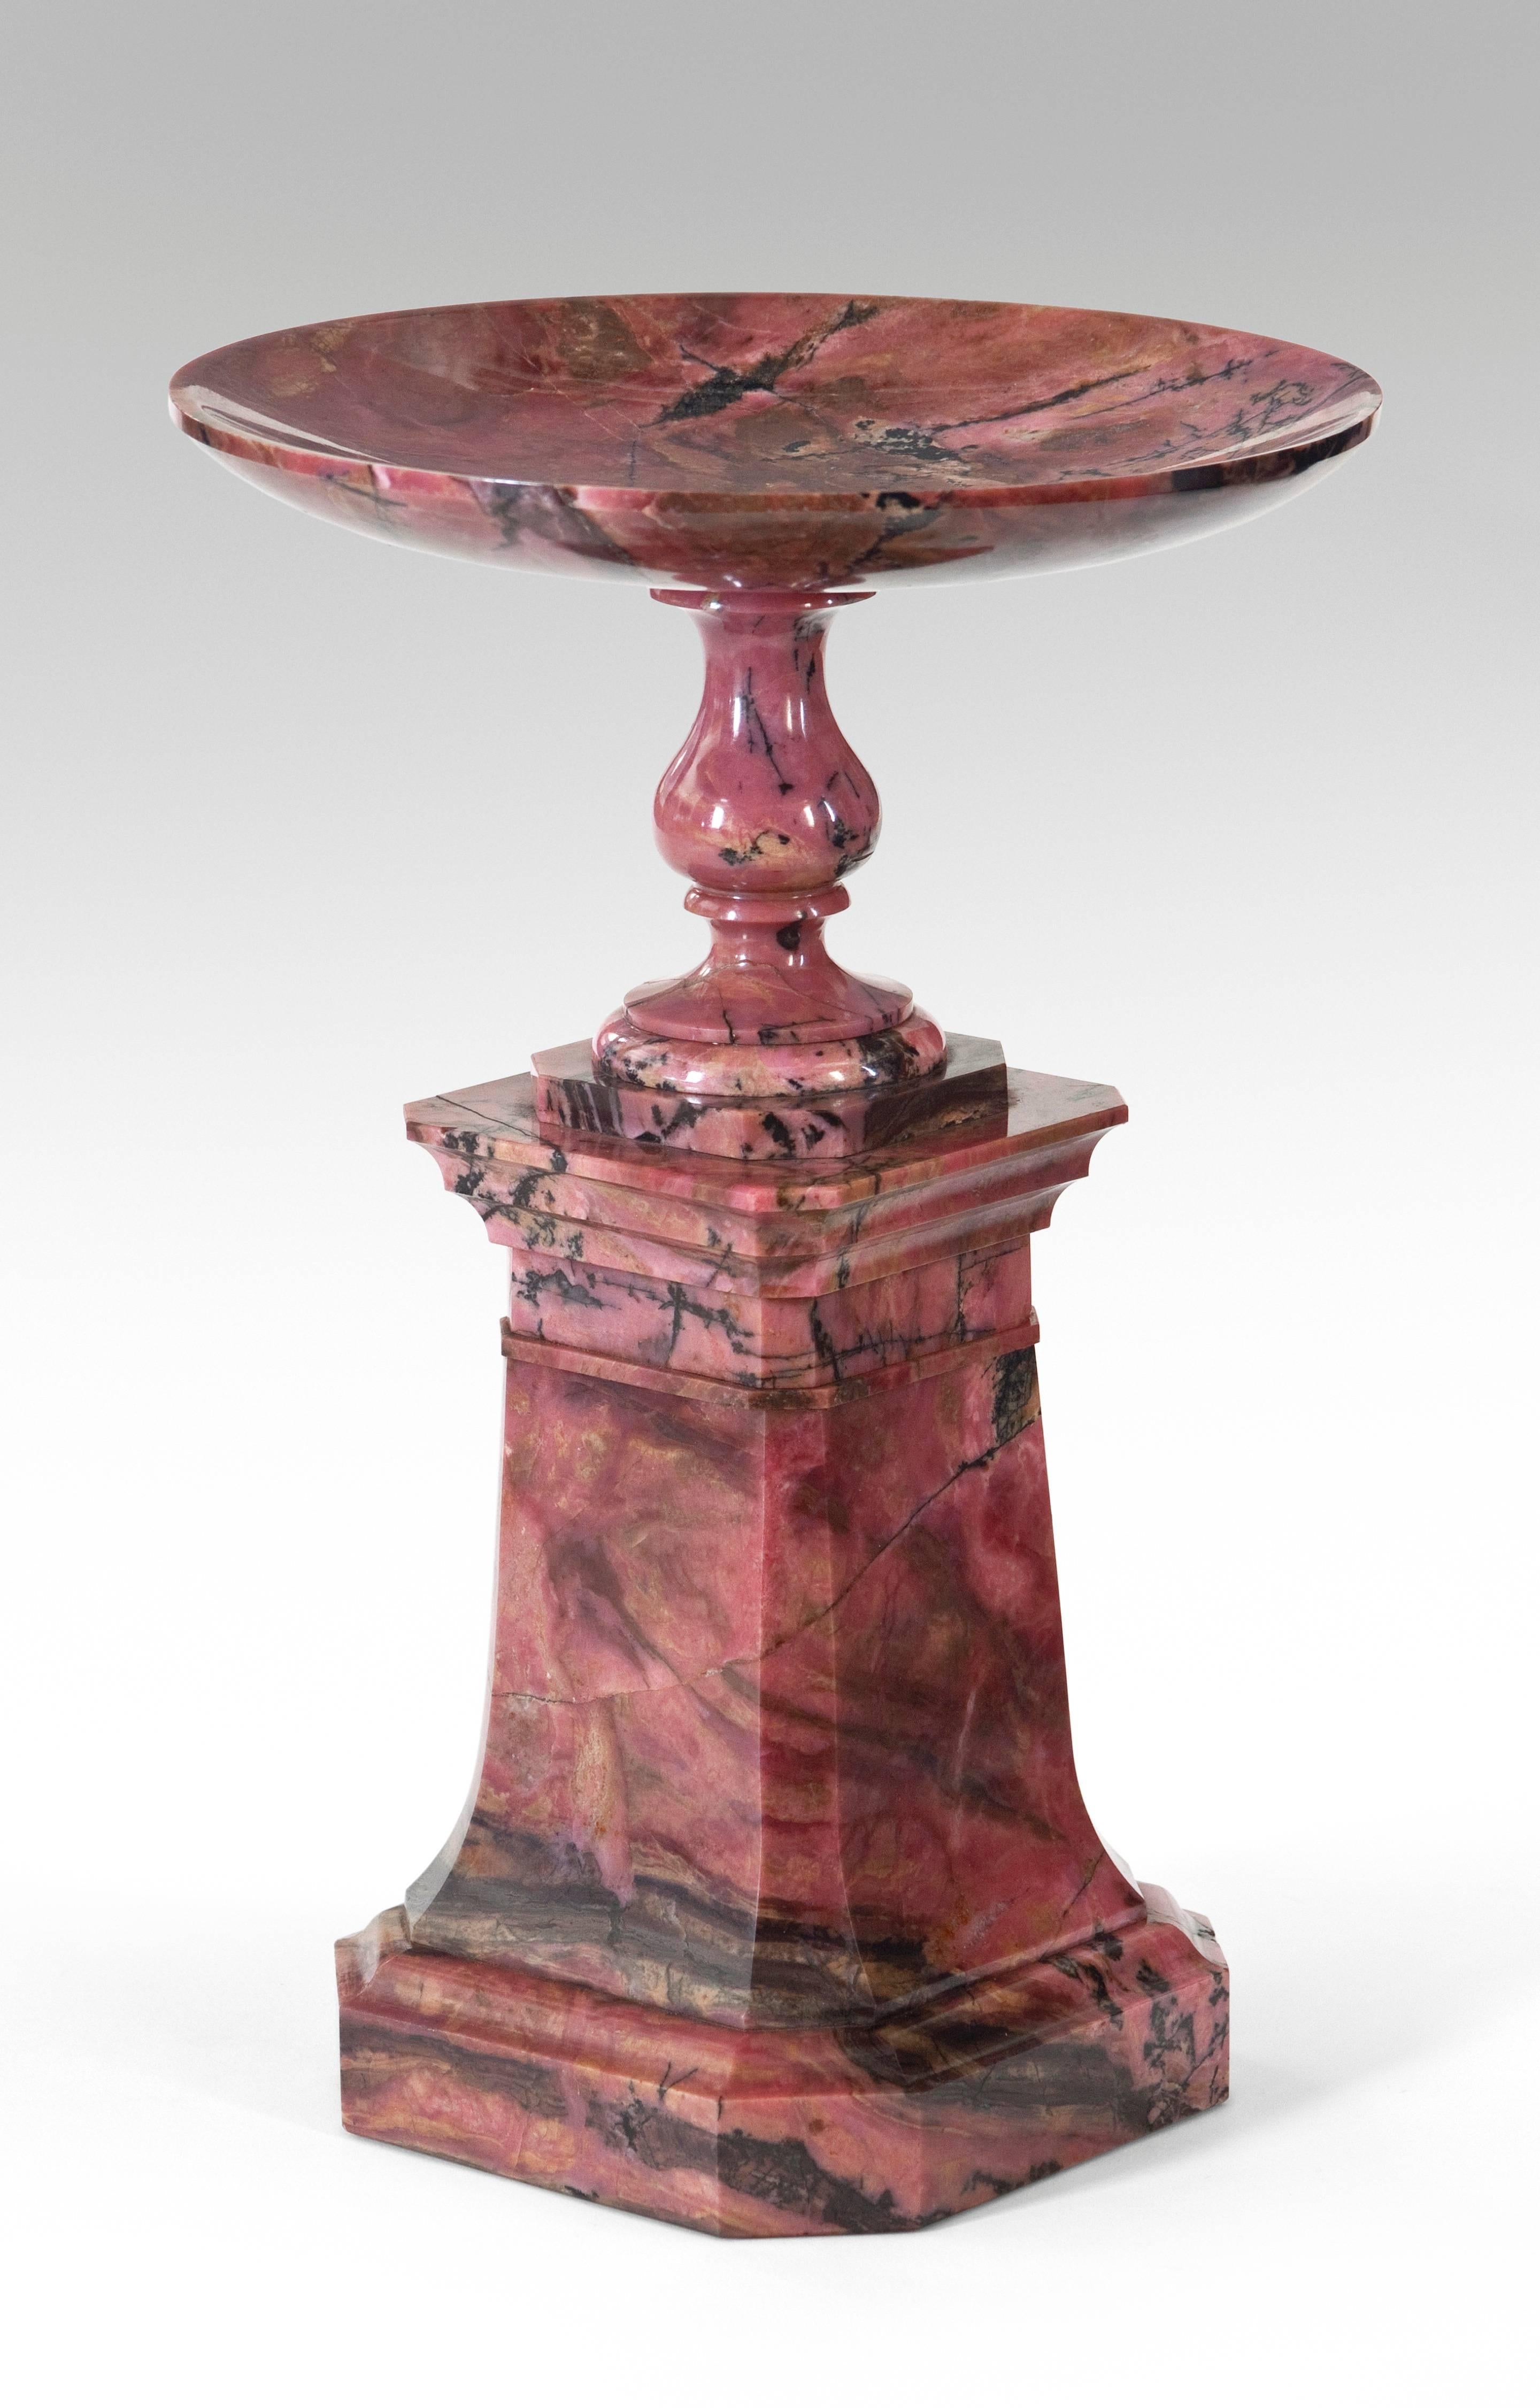 Exceptionally high quality craftsmanship and choice selection of beautifully deep colored, radiant pink rhodonite. The shallow circular dish above the baluster socle, raised on a canted square spreading pedestal and conforming molded base.

Very